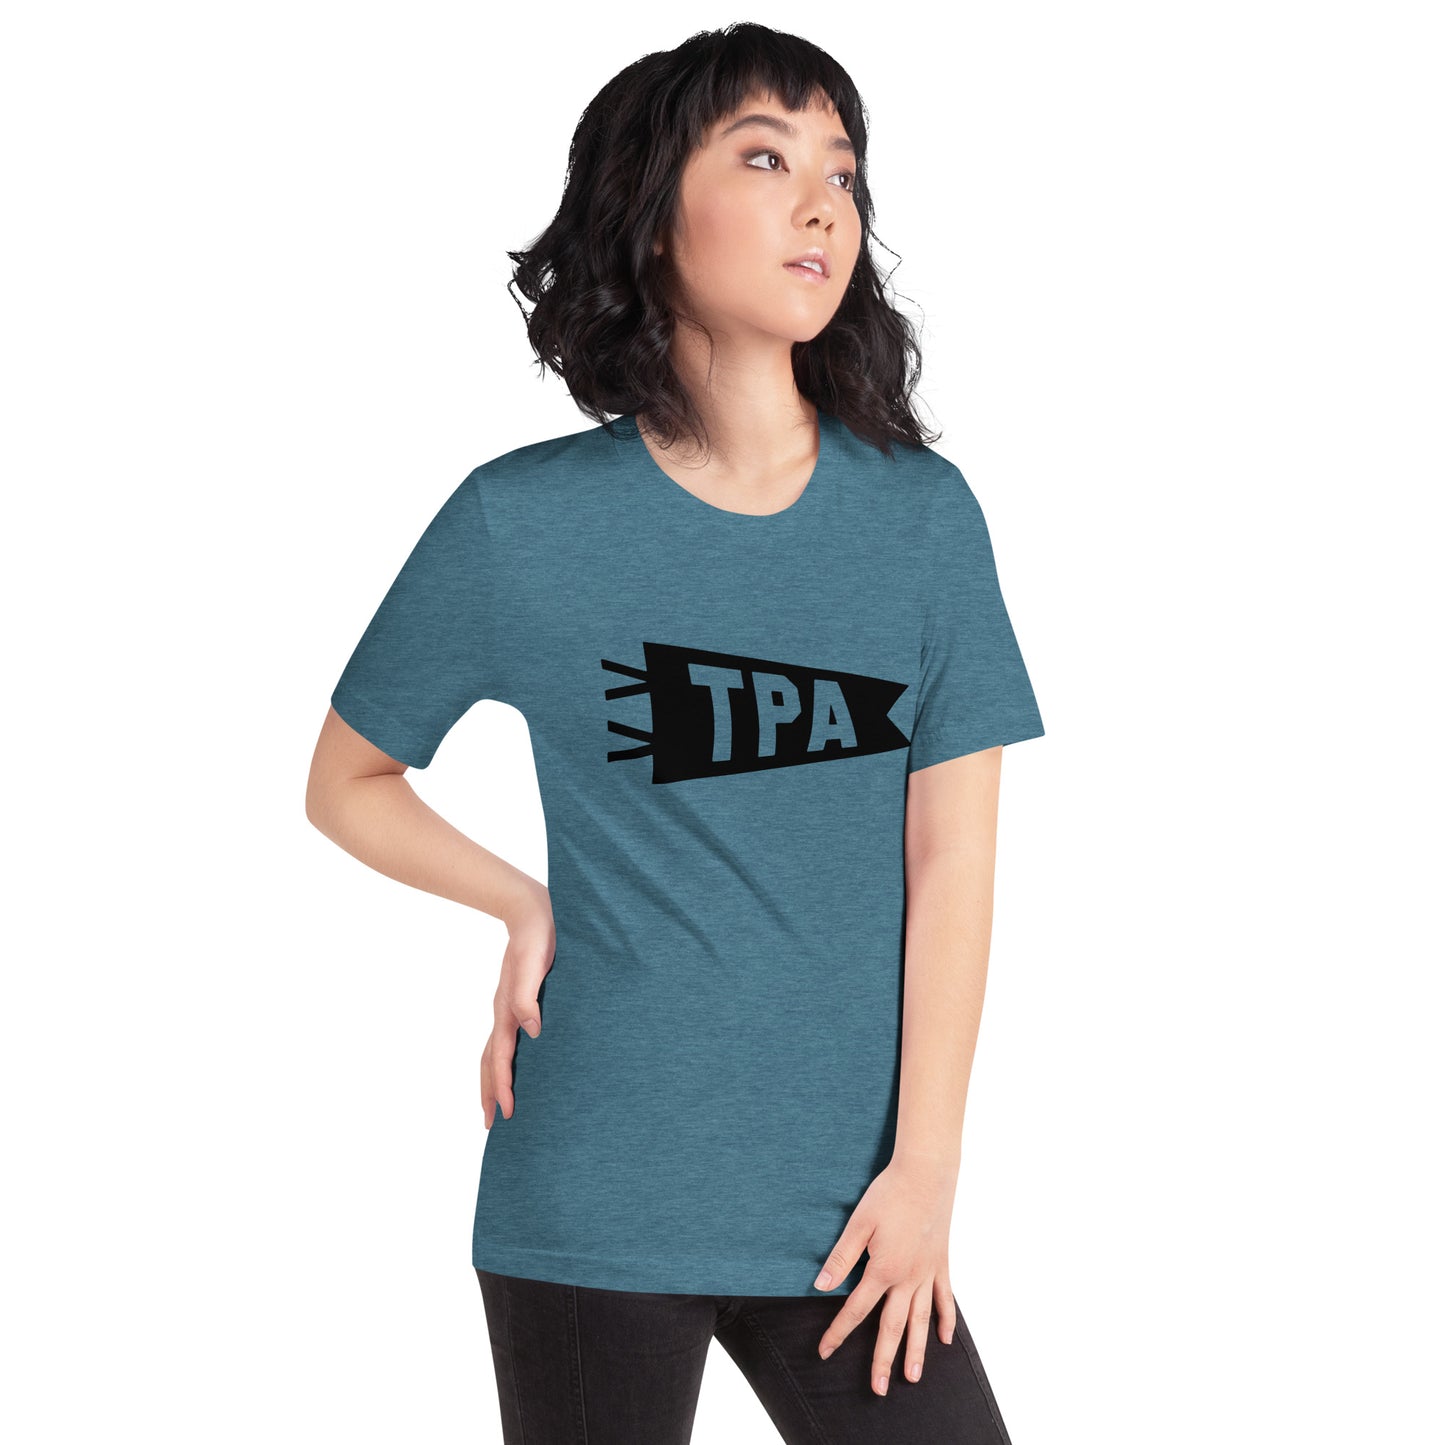 Airport Code T-Shirt - Black Graphic • TPA Tampa • YHM Designs - Image 03